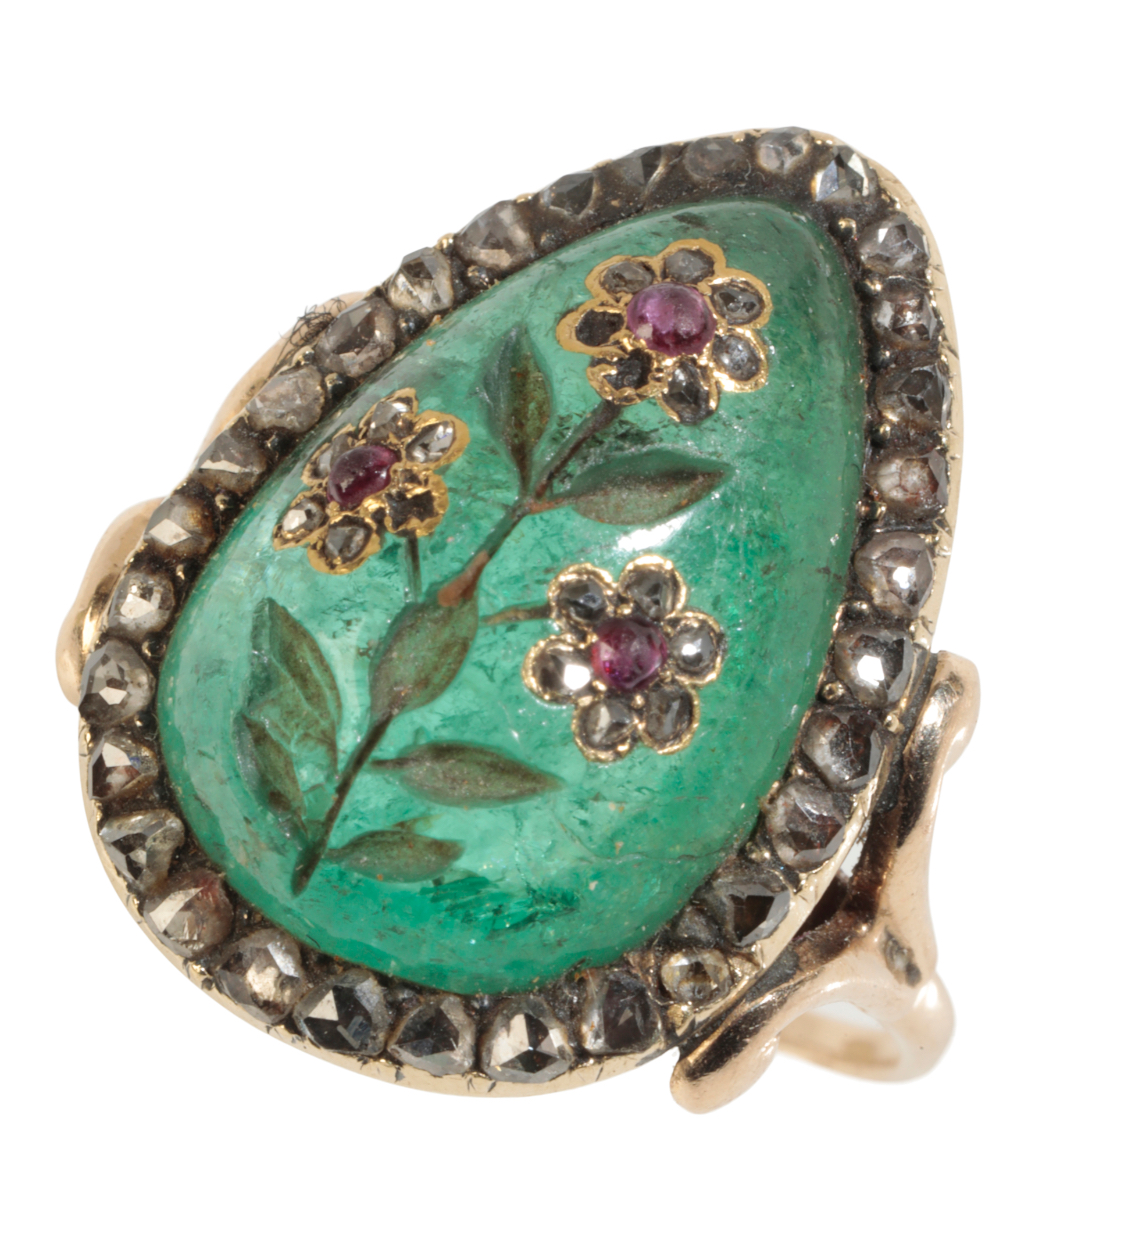 A 19TH CENTURY INDIAN EMERALD, DIAMOND AND RUBY RING